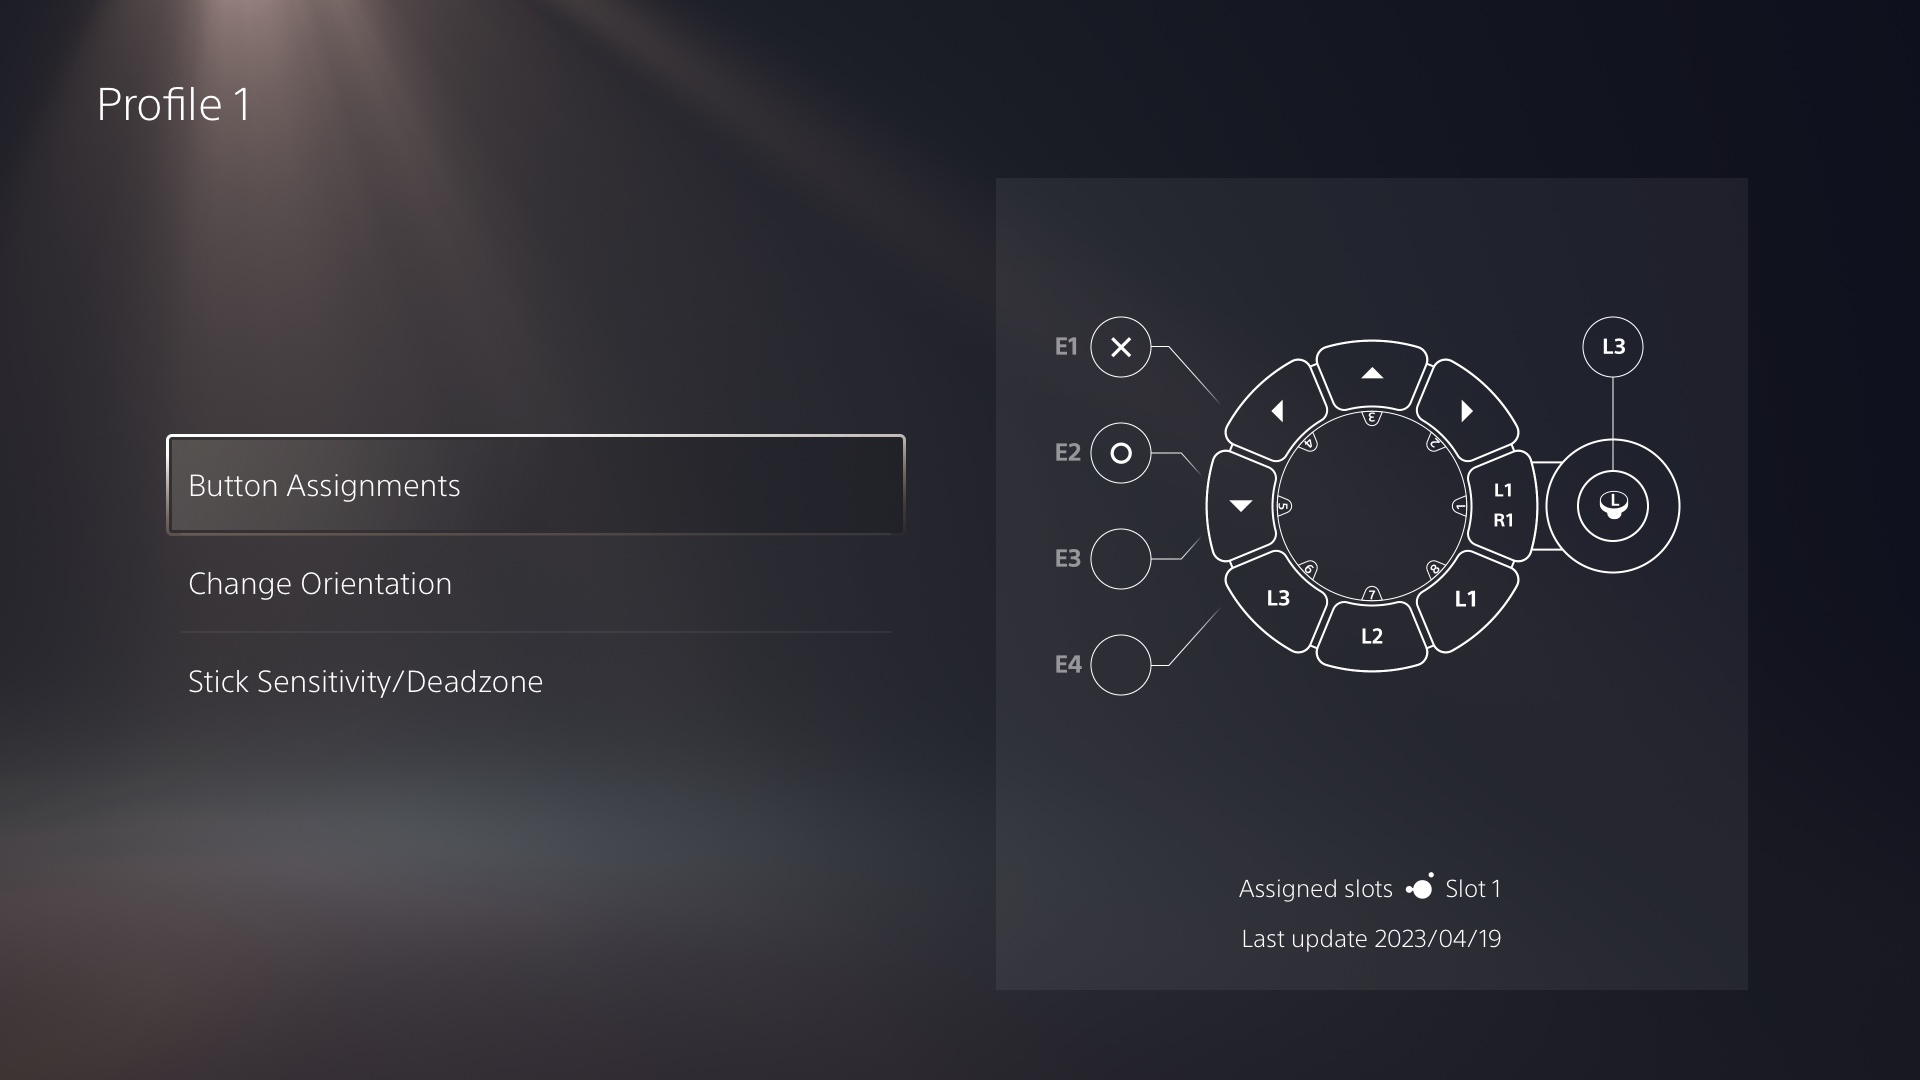  "Access controller UI image showing button mapping options"